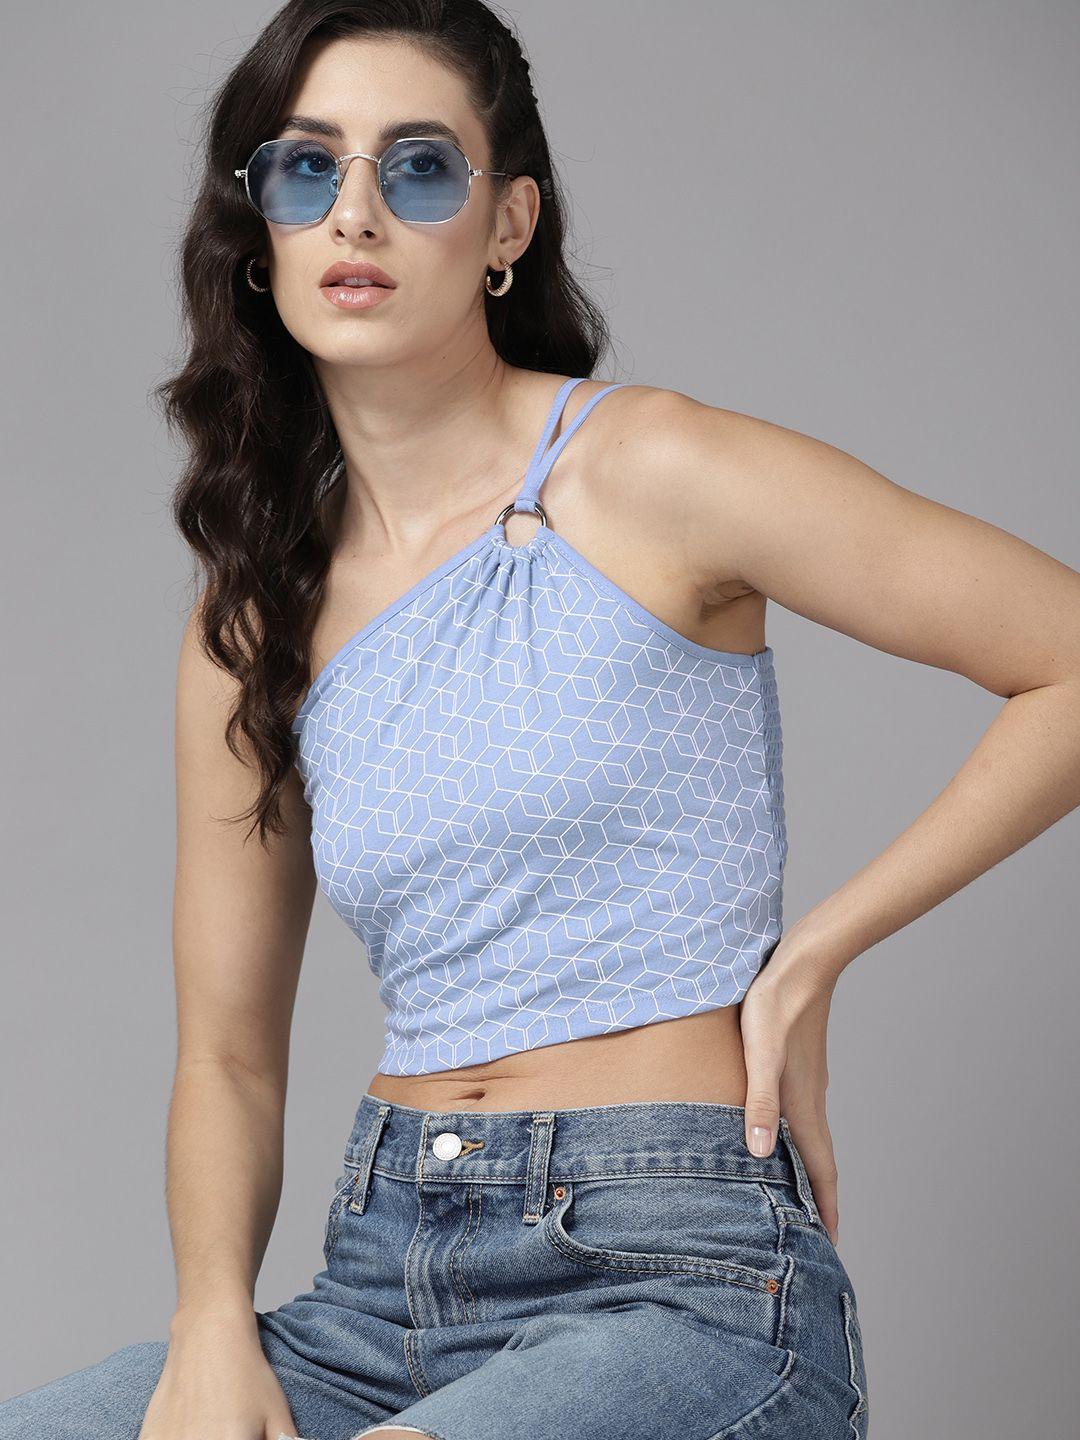 the roadster lifestyle co. geometric print one shoulder crop top